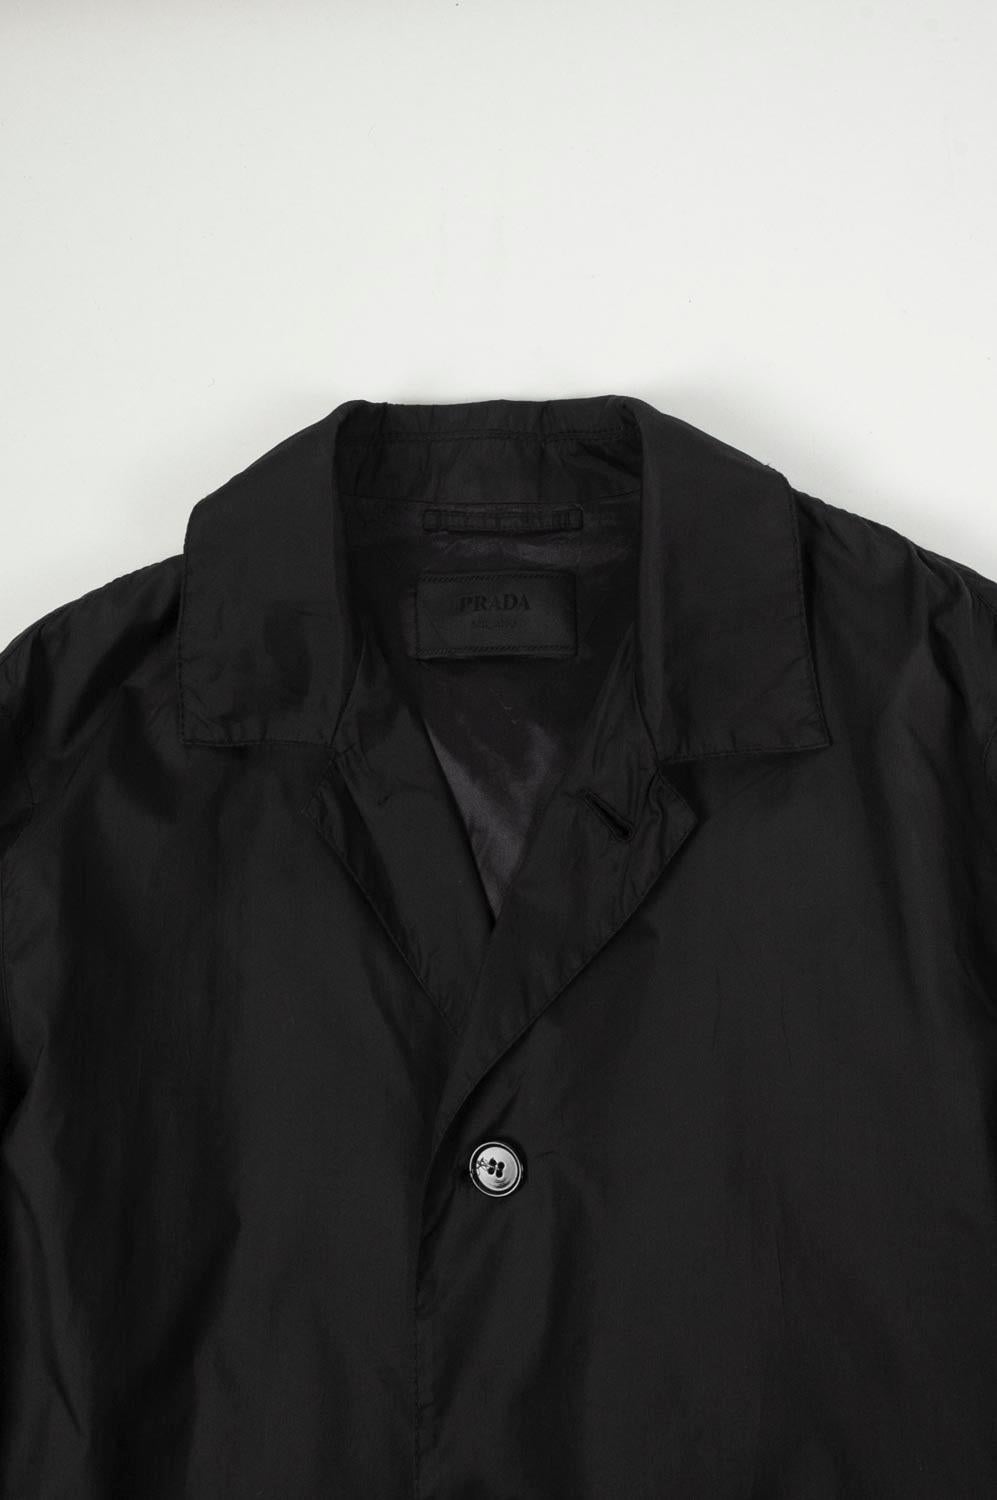 Item for sale is 100% genuine Prada Men Belted Trench Coat, S425
Color: Black
(An actual color may a bit vary due to individual computer screen interpretation)
Material: 100% polyamide
Tag size: 50IT 
This coat is great quality item. Rate 8.5 of 10,